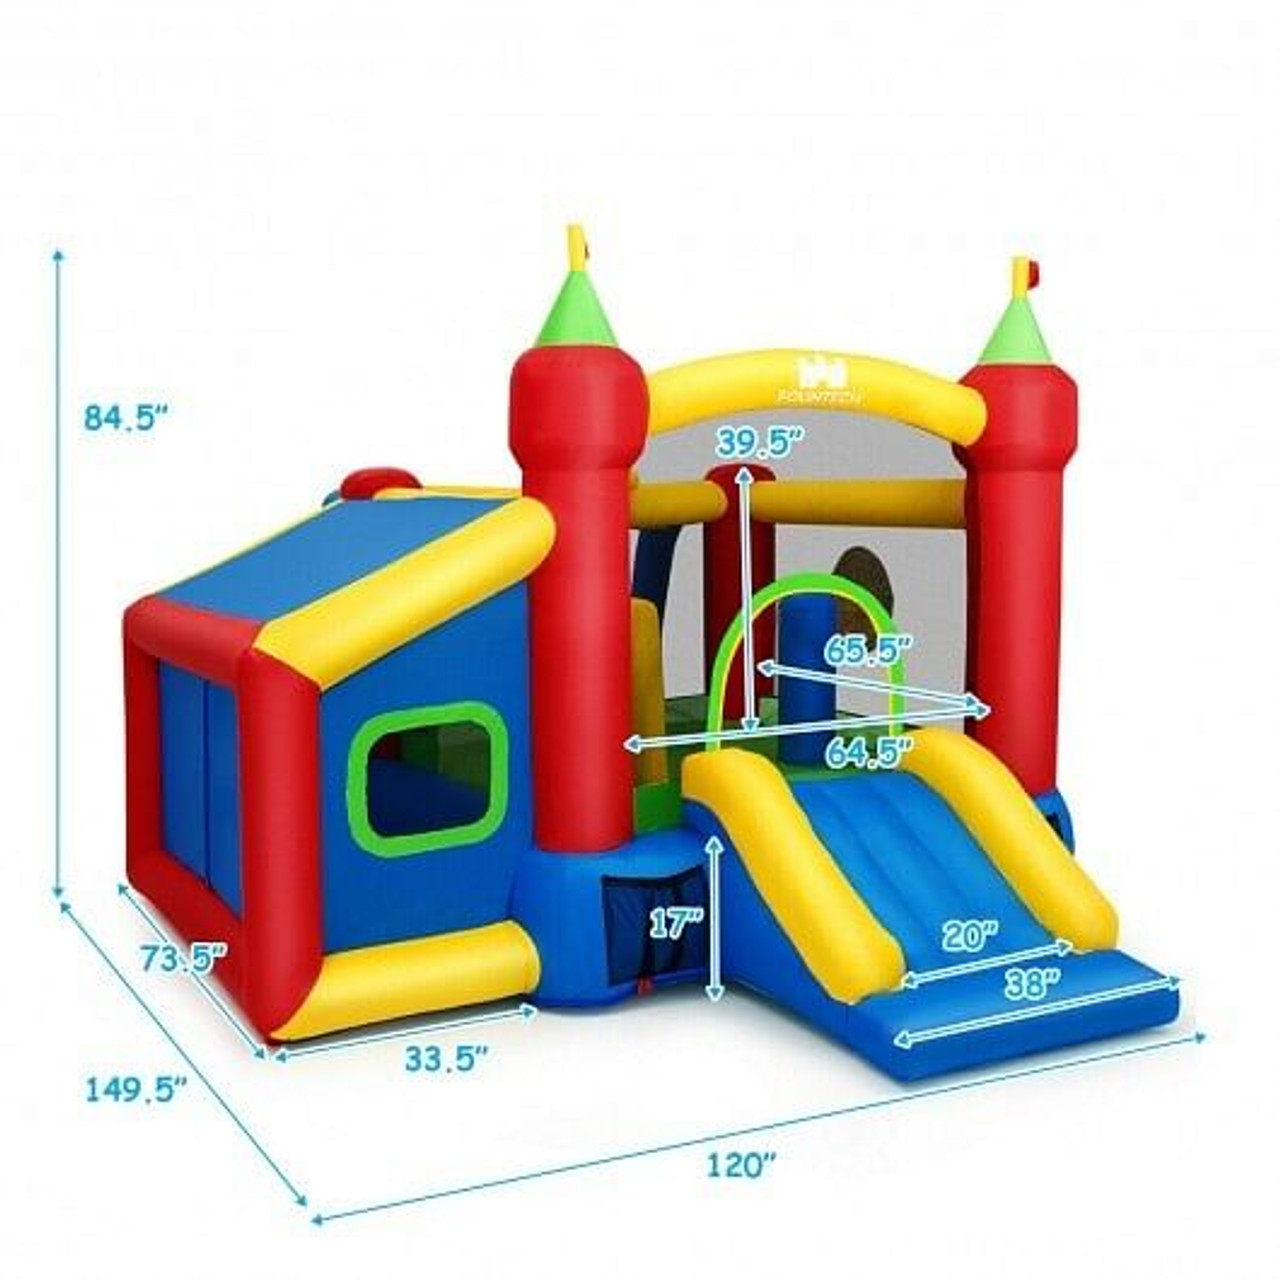 7-in-1 Kids Inflatable Bounce House with Ocean Balls and 480W Blower